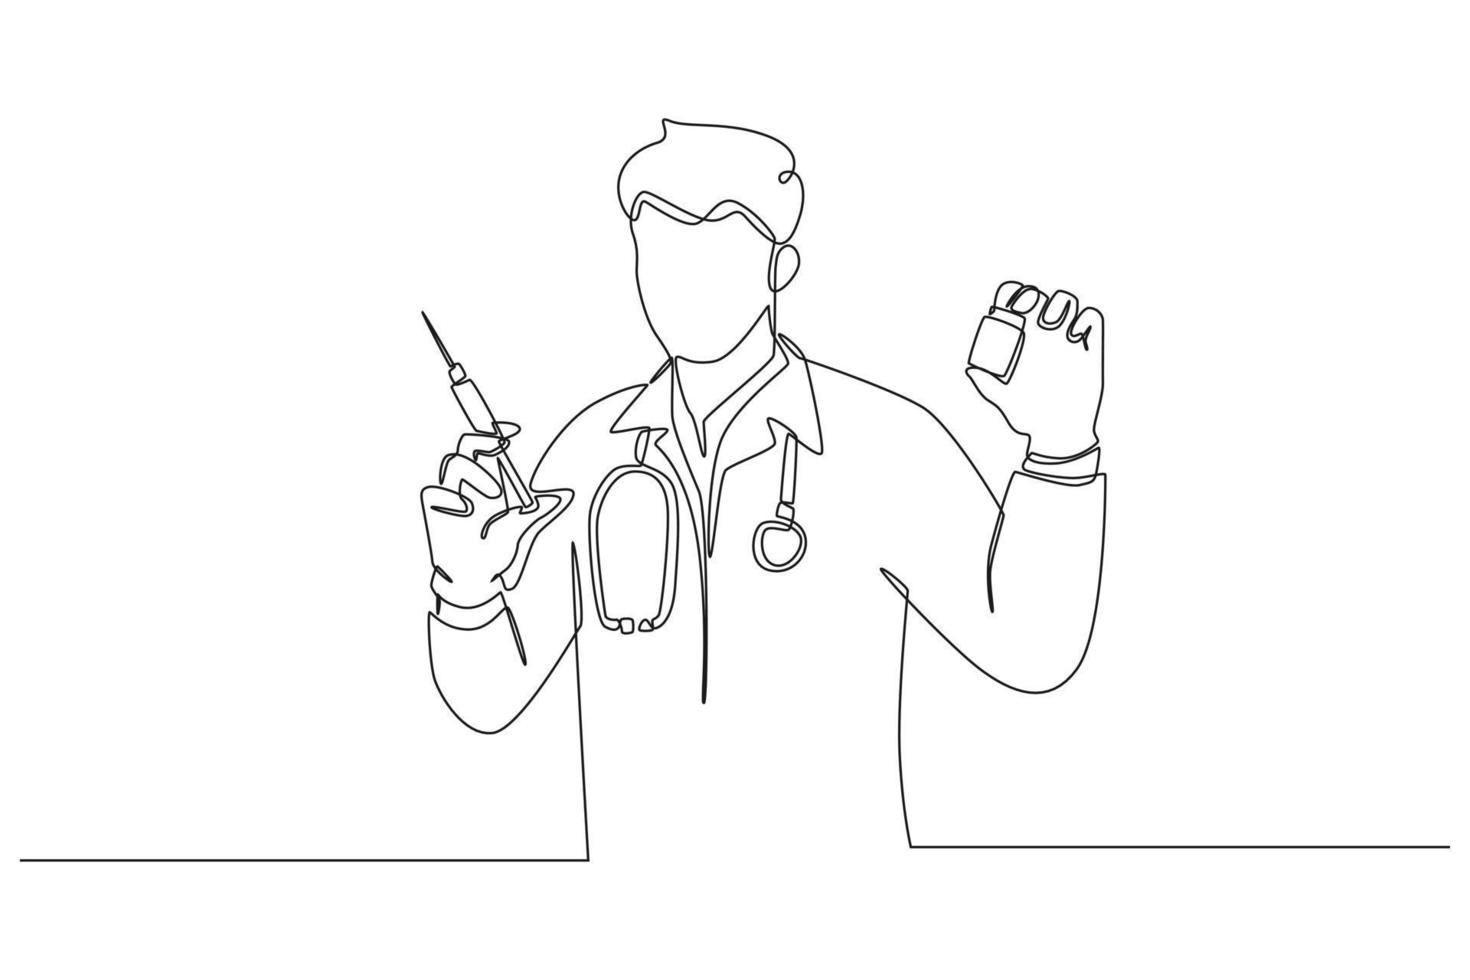 Single one line drawing doctor holds vaccine and syringe for a patient. Need a Doctor concept. Continuous line draw design graphic vector illustration.